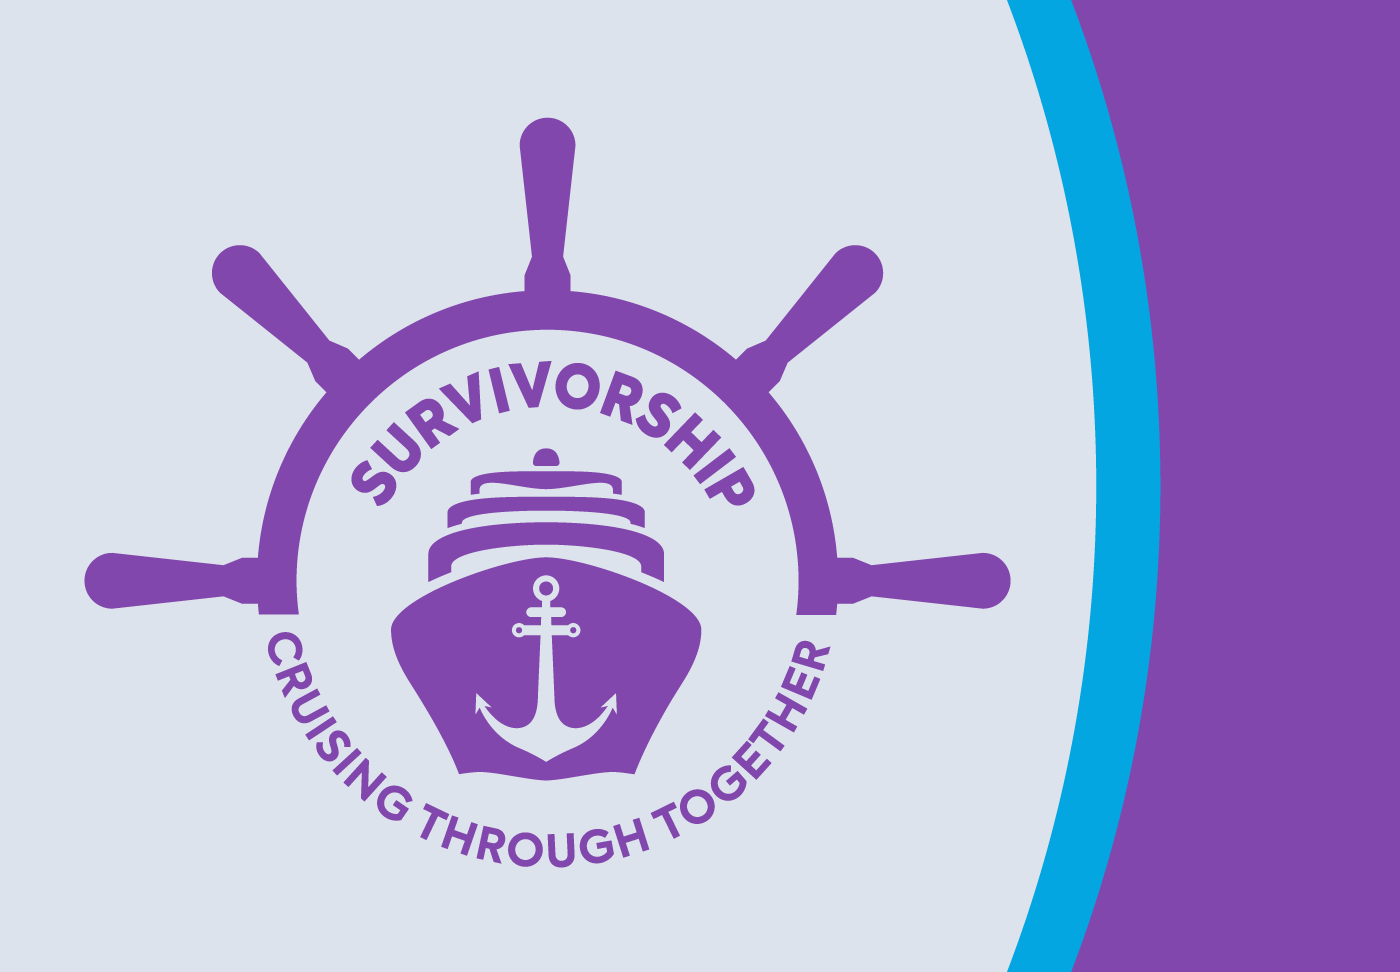 Illustration of boat and ship wheel. Text reads "Survivorship, cruising through together"